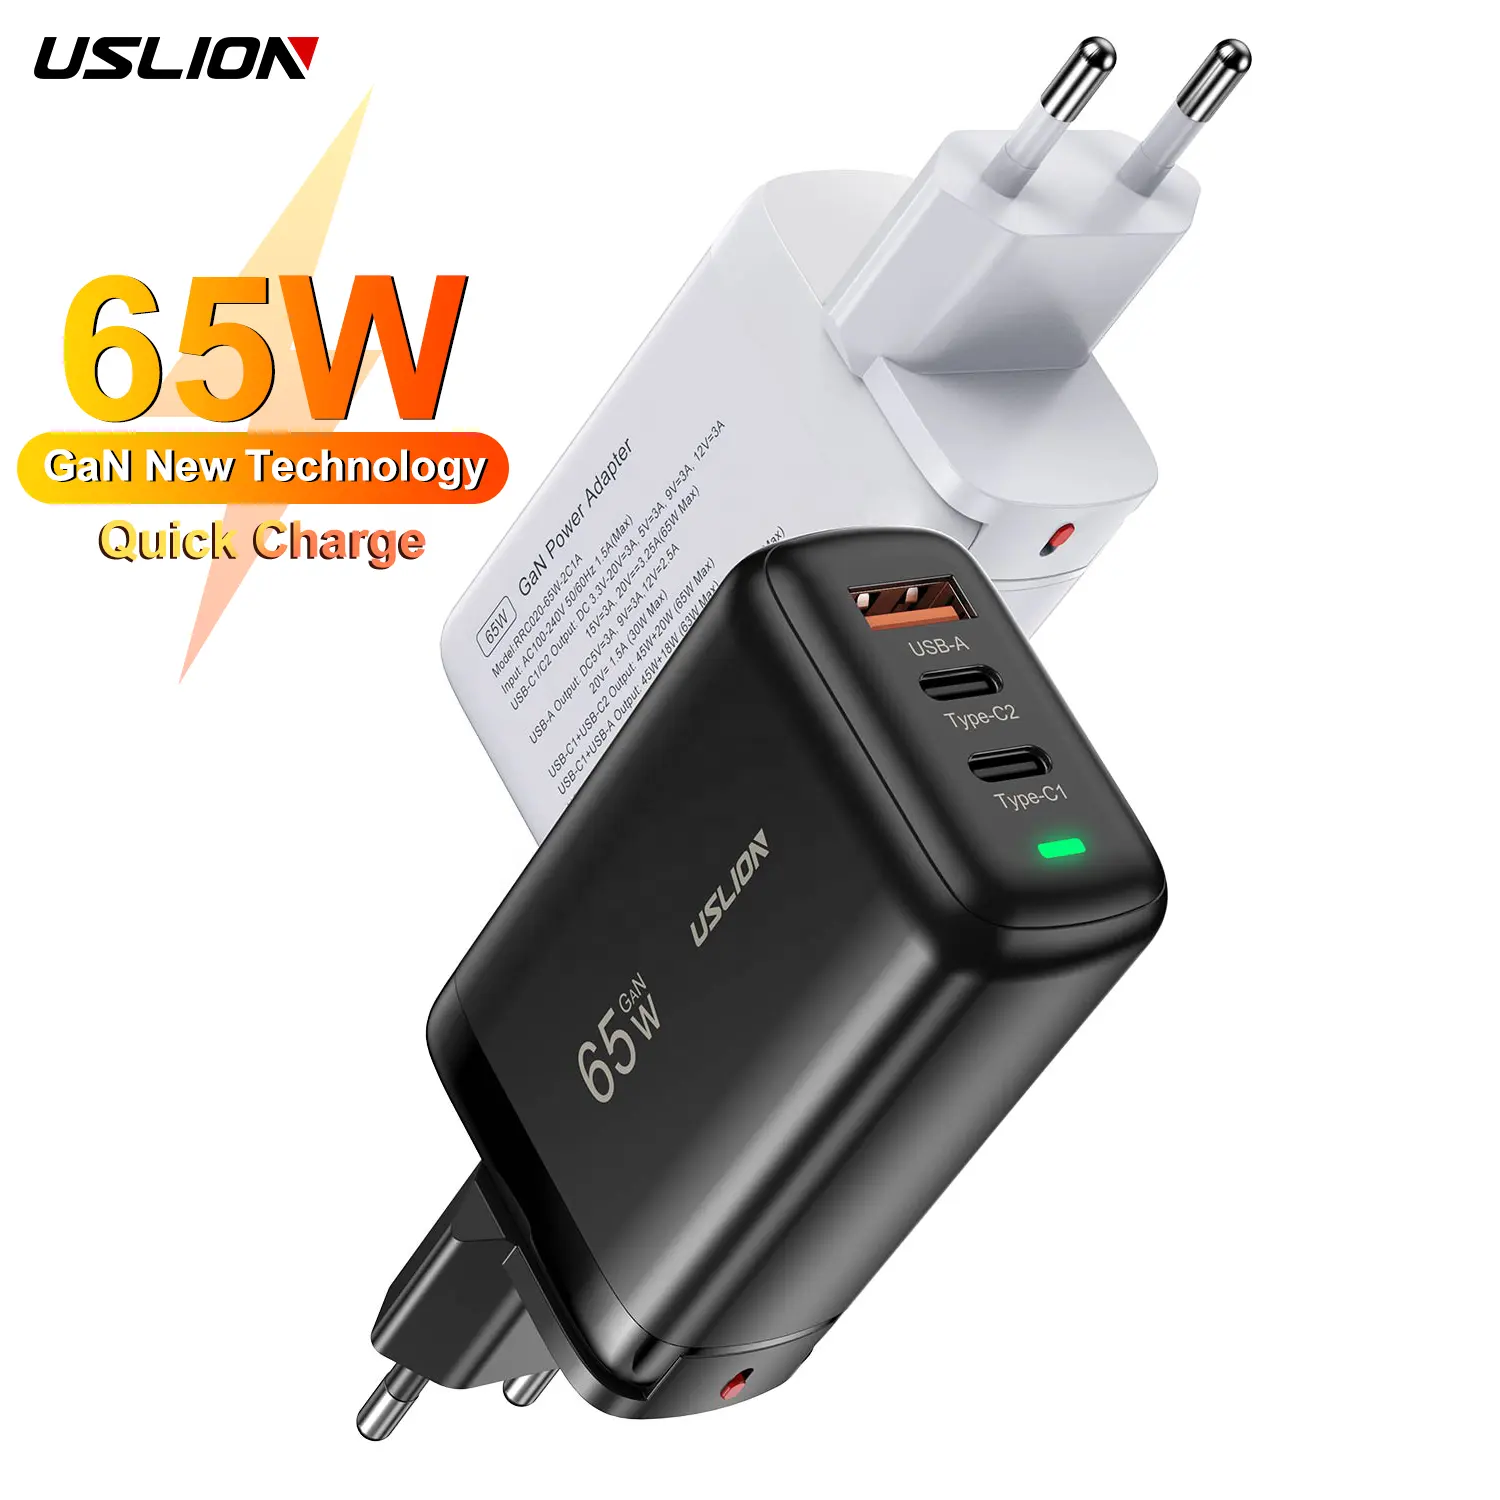 USLION 65W Charger USB C GaN Charger 2 PD + USB Charger Mobile Phone Tablet Laptop 3 Port Travel Wall Adapter